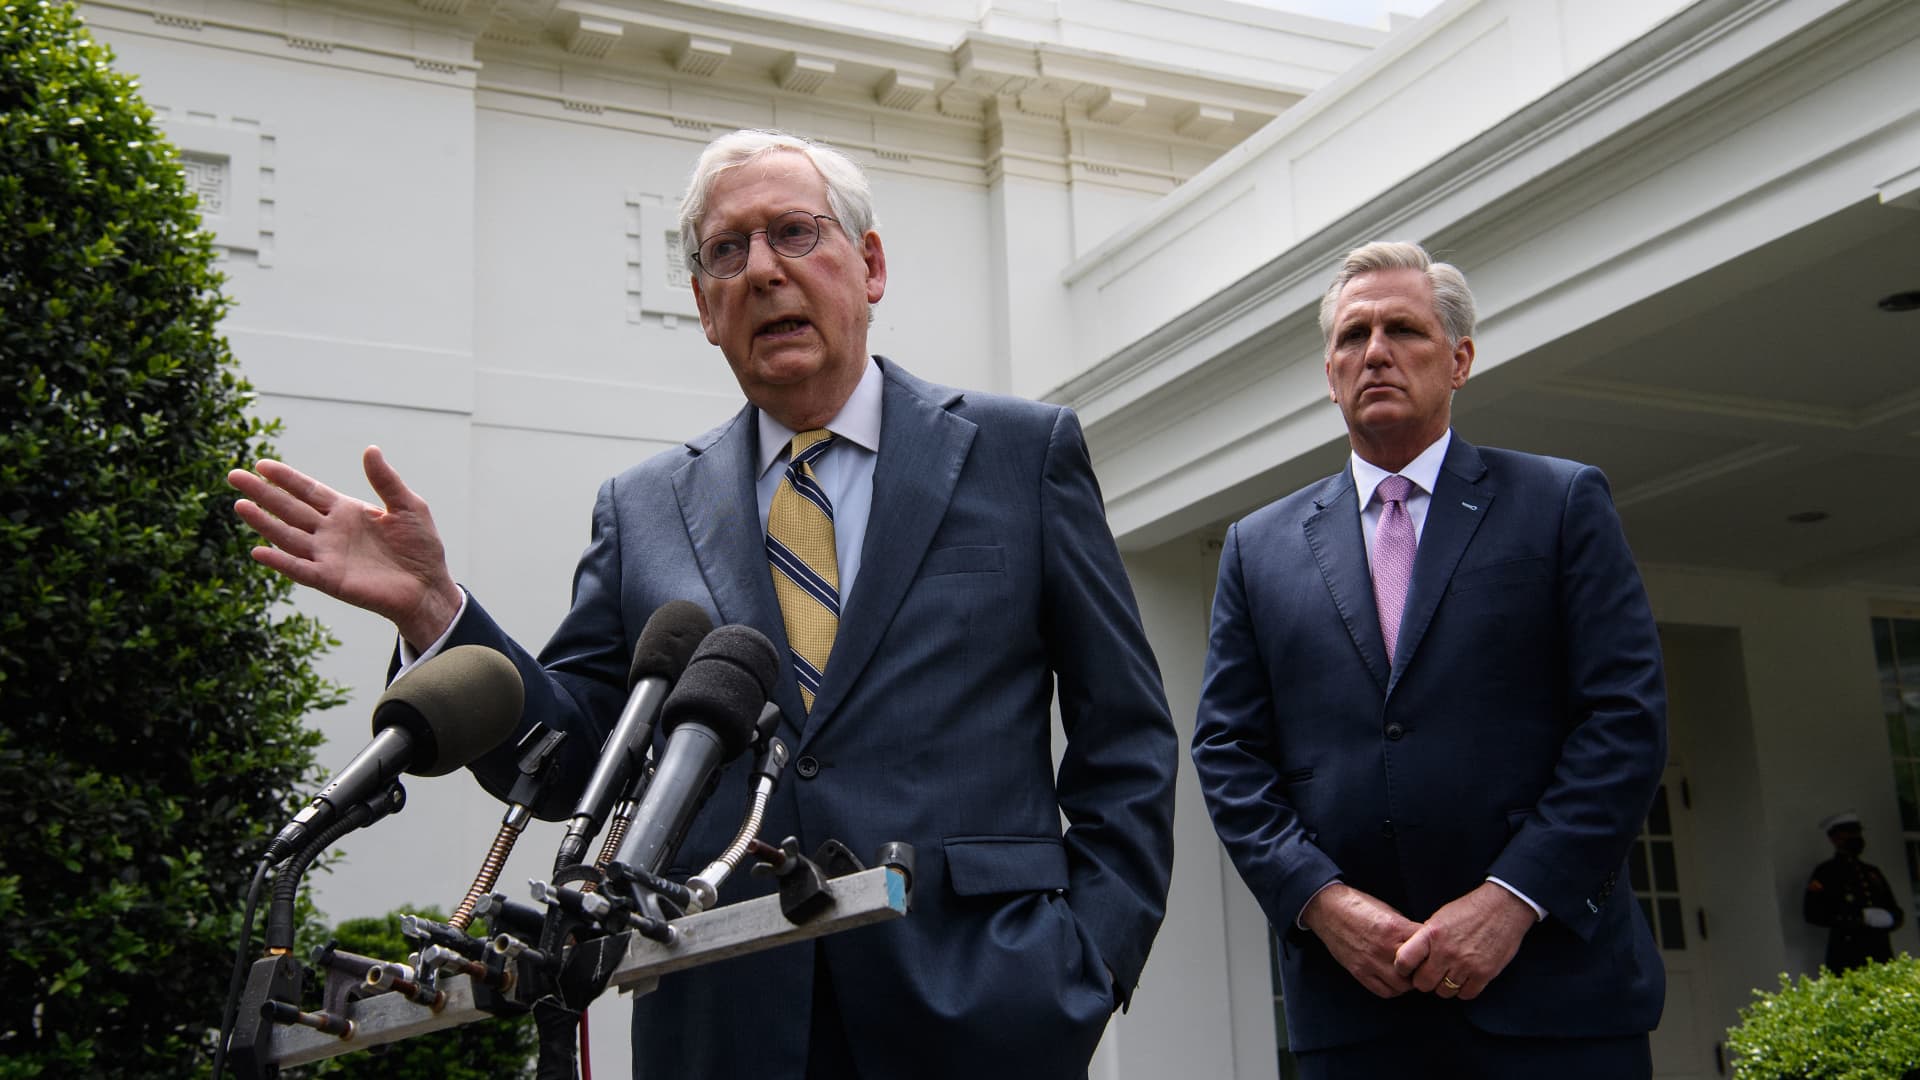 US Senate Minority Leader Mitch McConnell(L)speaks to the press as House Minority Leader Kevin McCarthy listens, following their meeting with US President Joe Biden and Democratic congressional leaders at the White House in Washington, DC, on May 12, 2021.